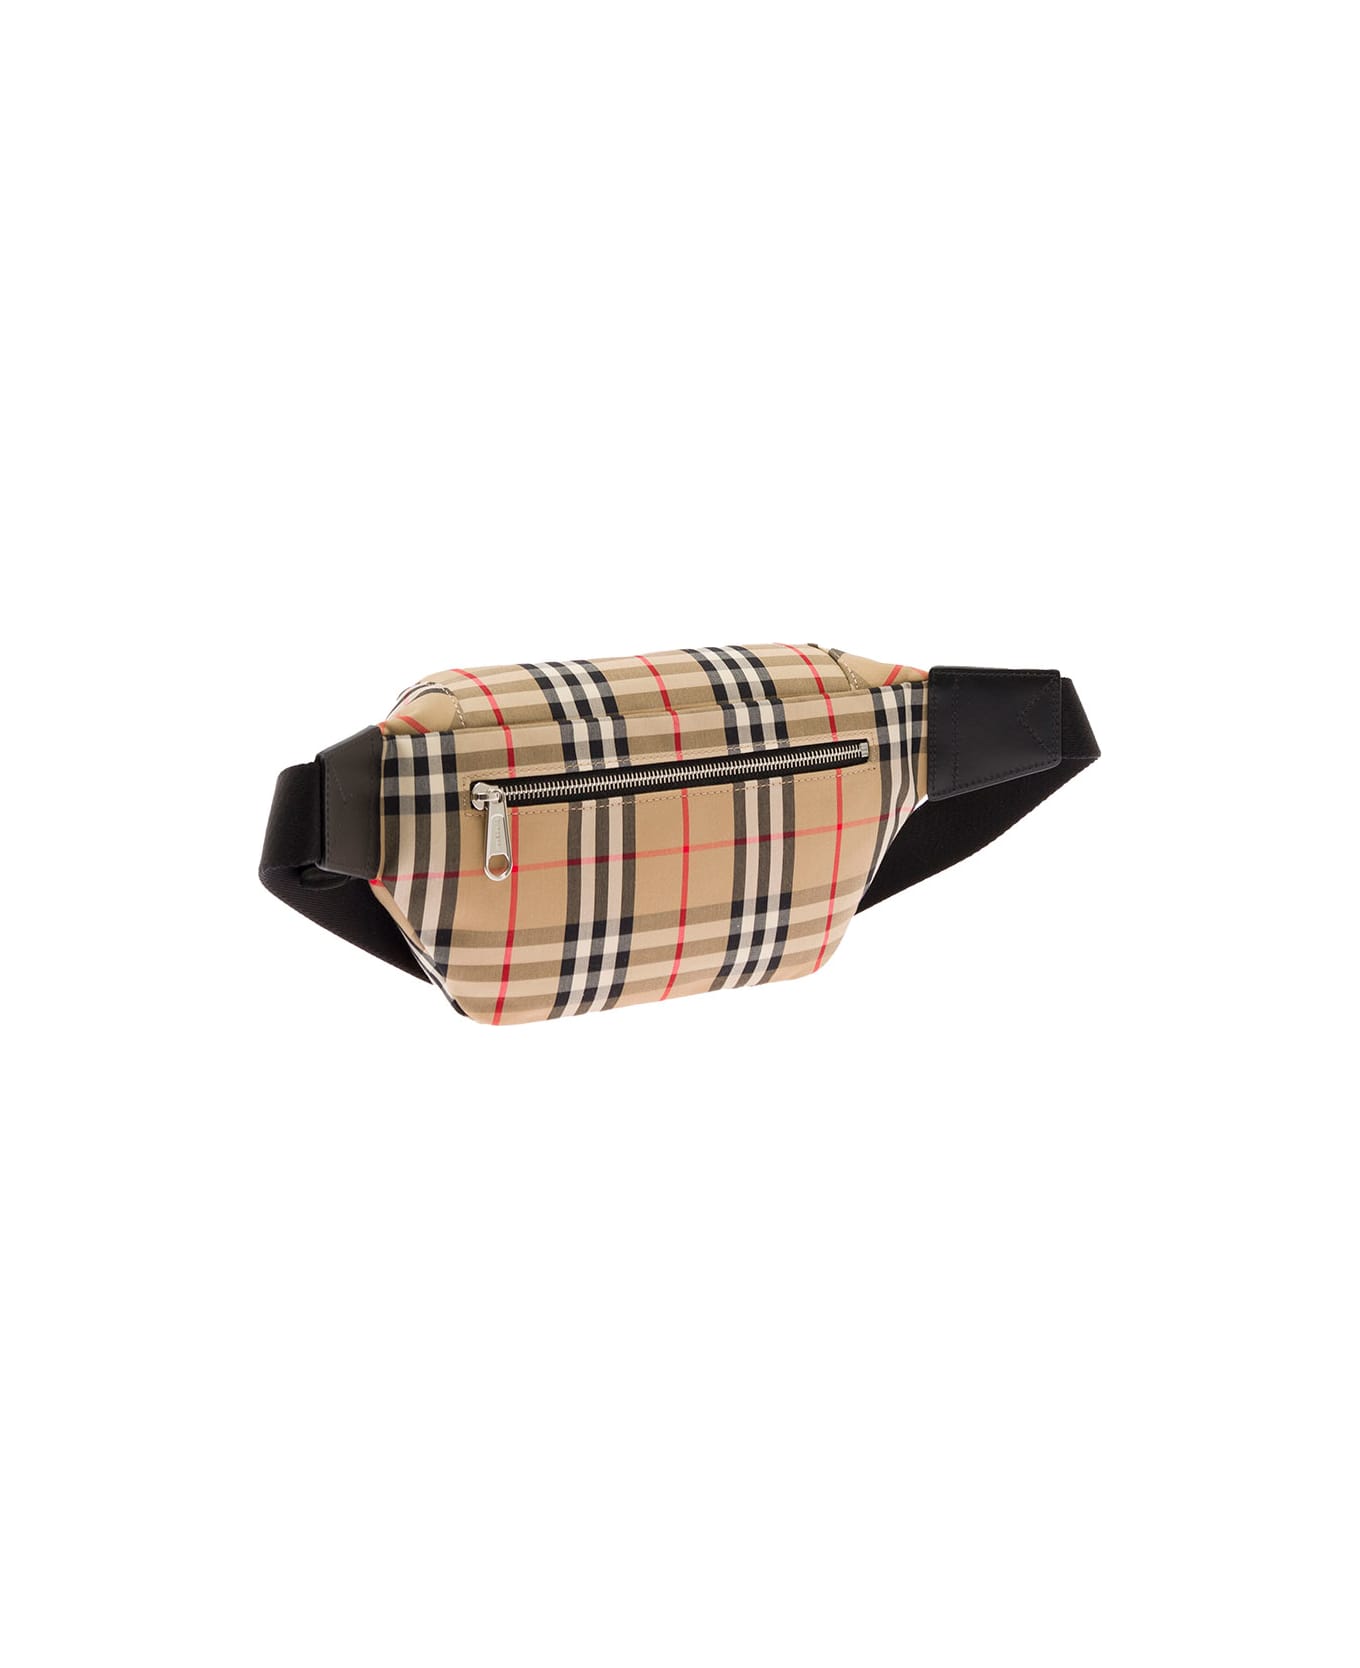 Burberry Sonny Beig Belt-bag In Tech Canvas With Vintage Check Pattern Burberry Man - Beige